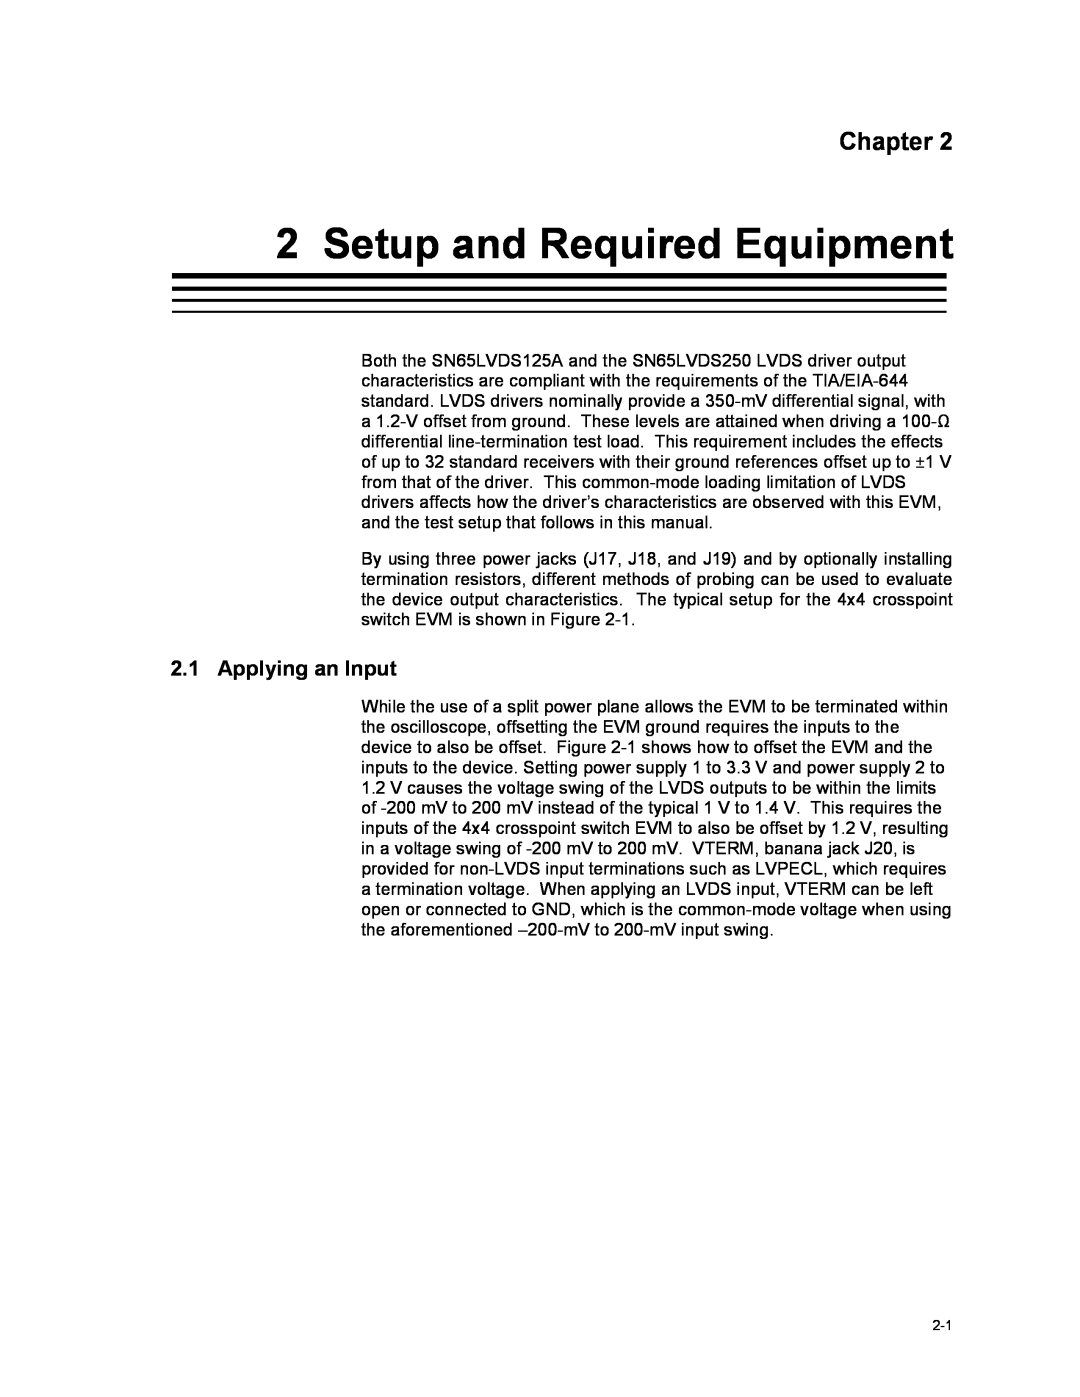 Texas Instruments HPL-D SLLU064A manual Setup and Required Equipment, Applying an Input, Chapter 